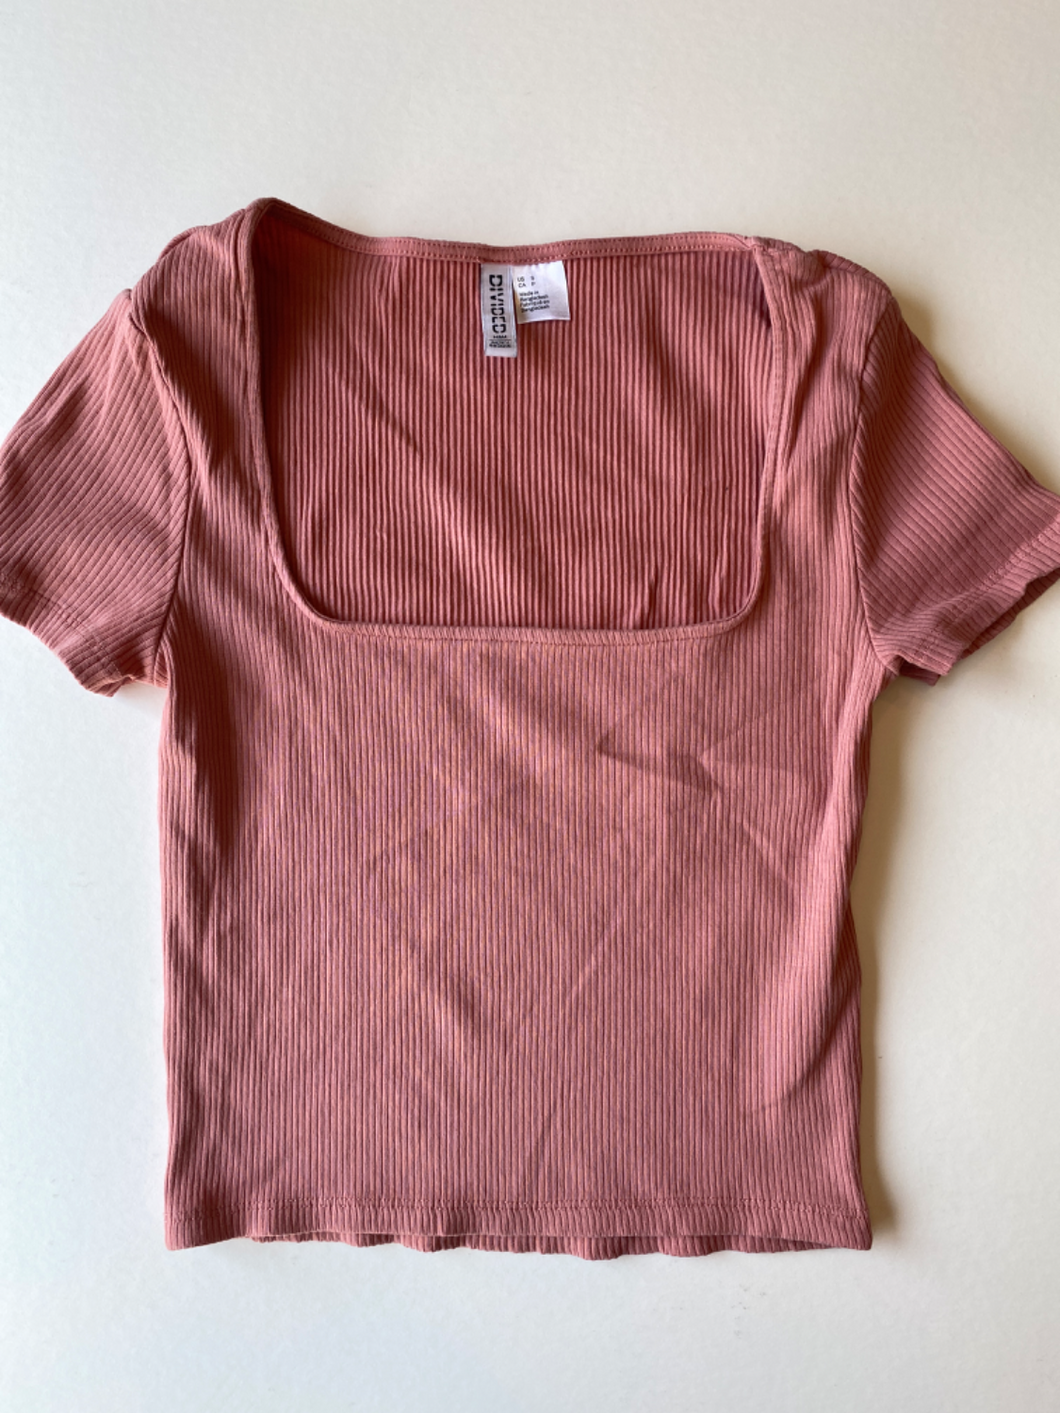 Divided Short Sleeve Top Size Small